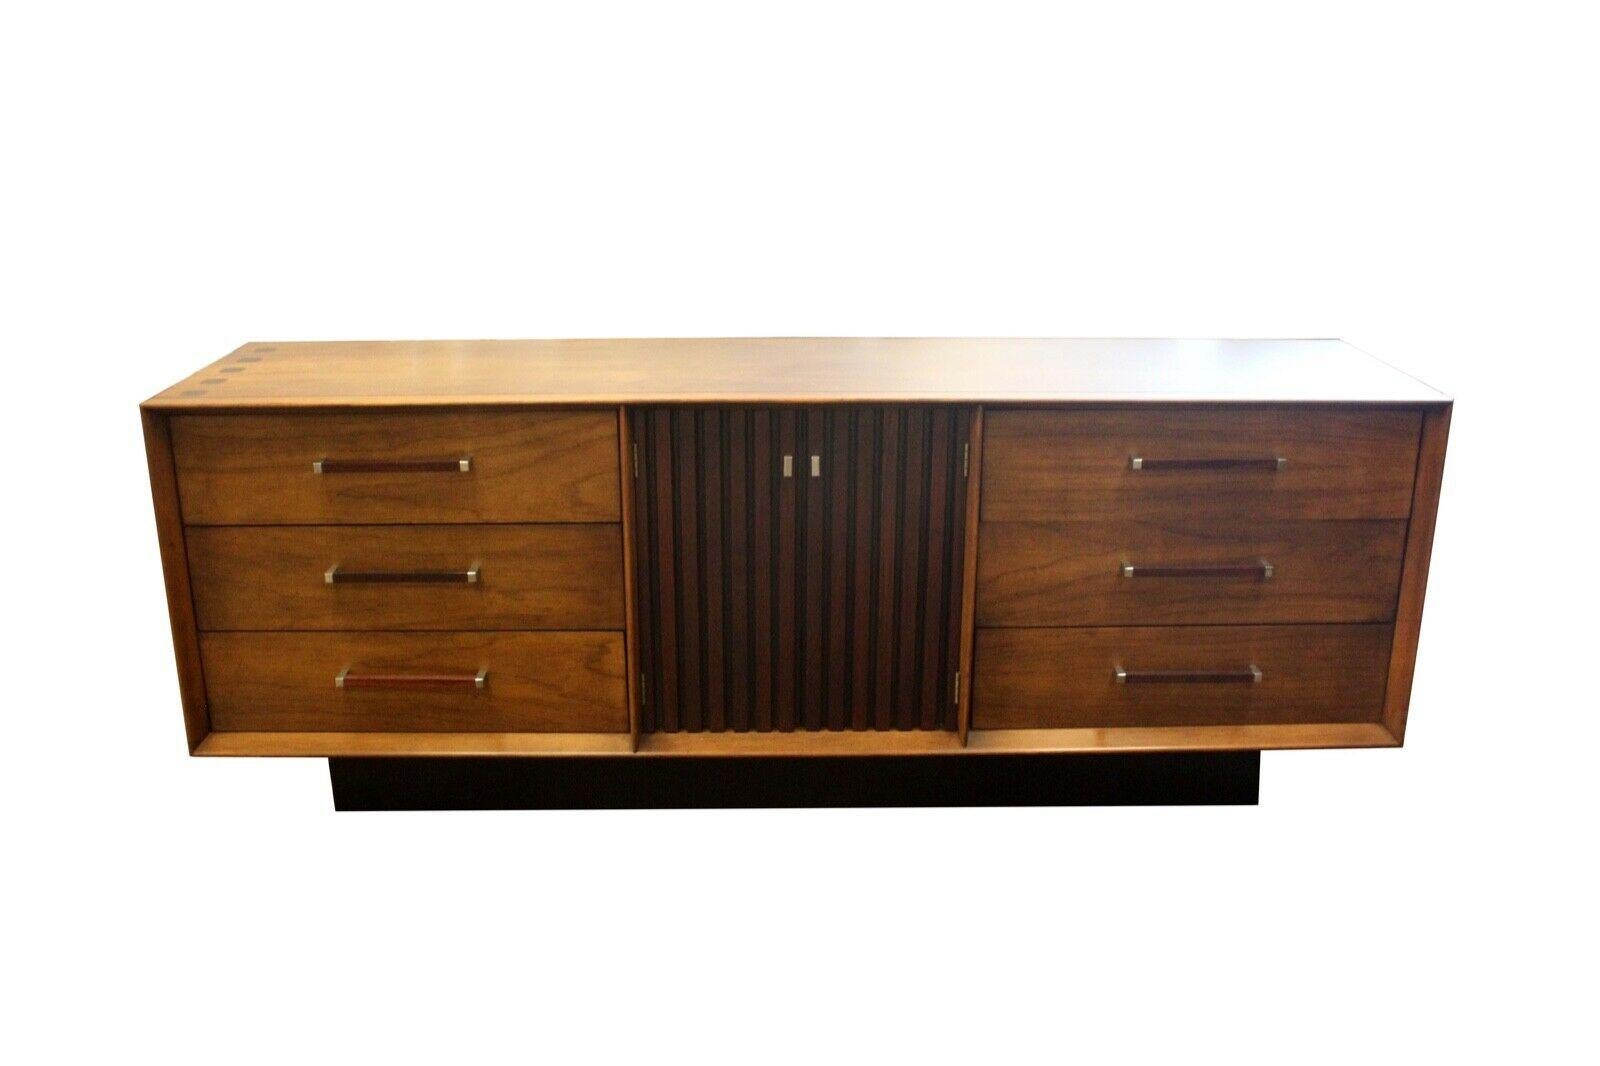 From Le Shoppe Too in Michigan comes this wonderful vintage modern six drawer lowboy dresser with storage. Known as the Lane 'Tower' Suite, this unique two-tone design with walnut casing and rosewood accents offers both beauty as well as quality.